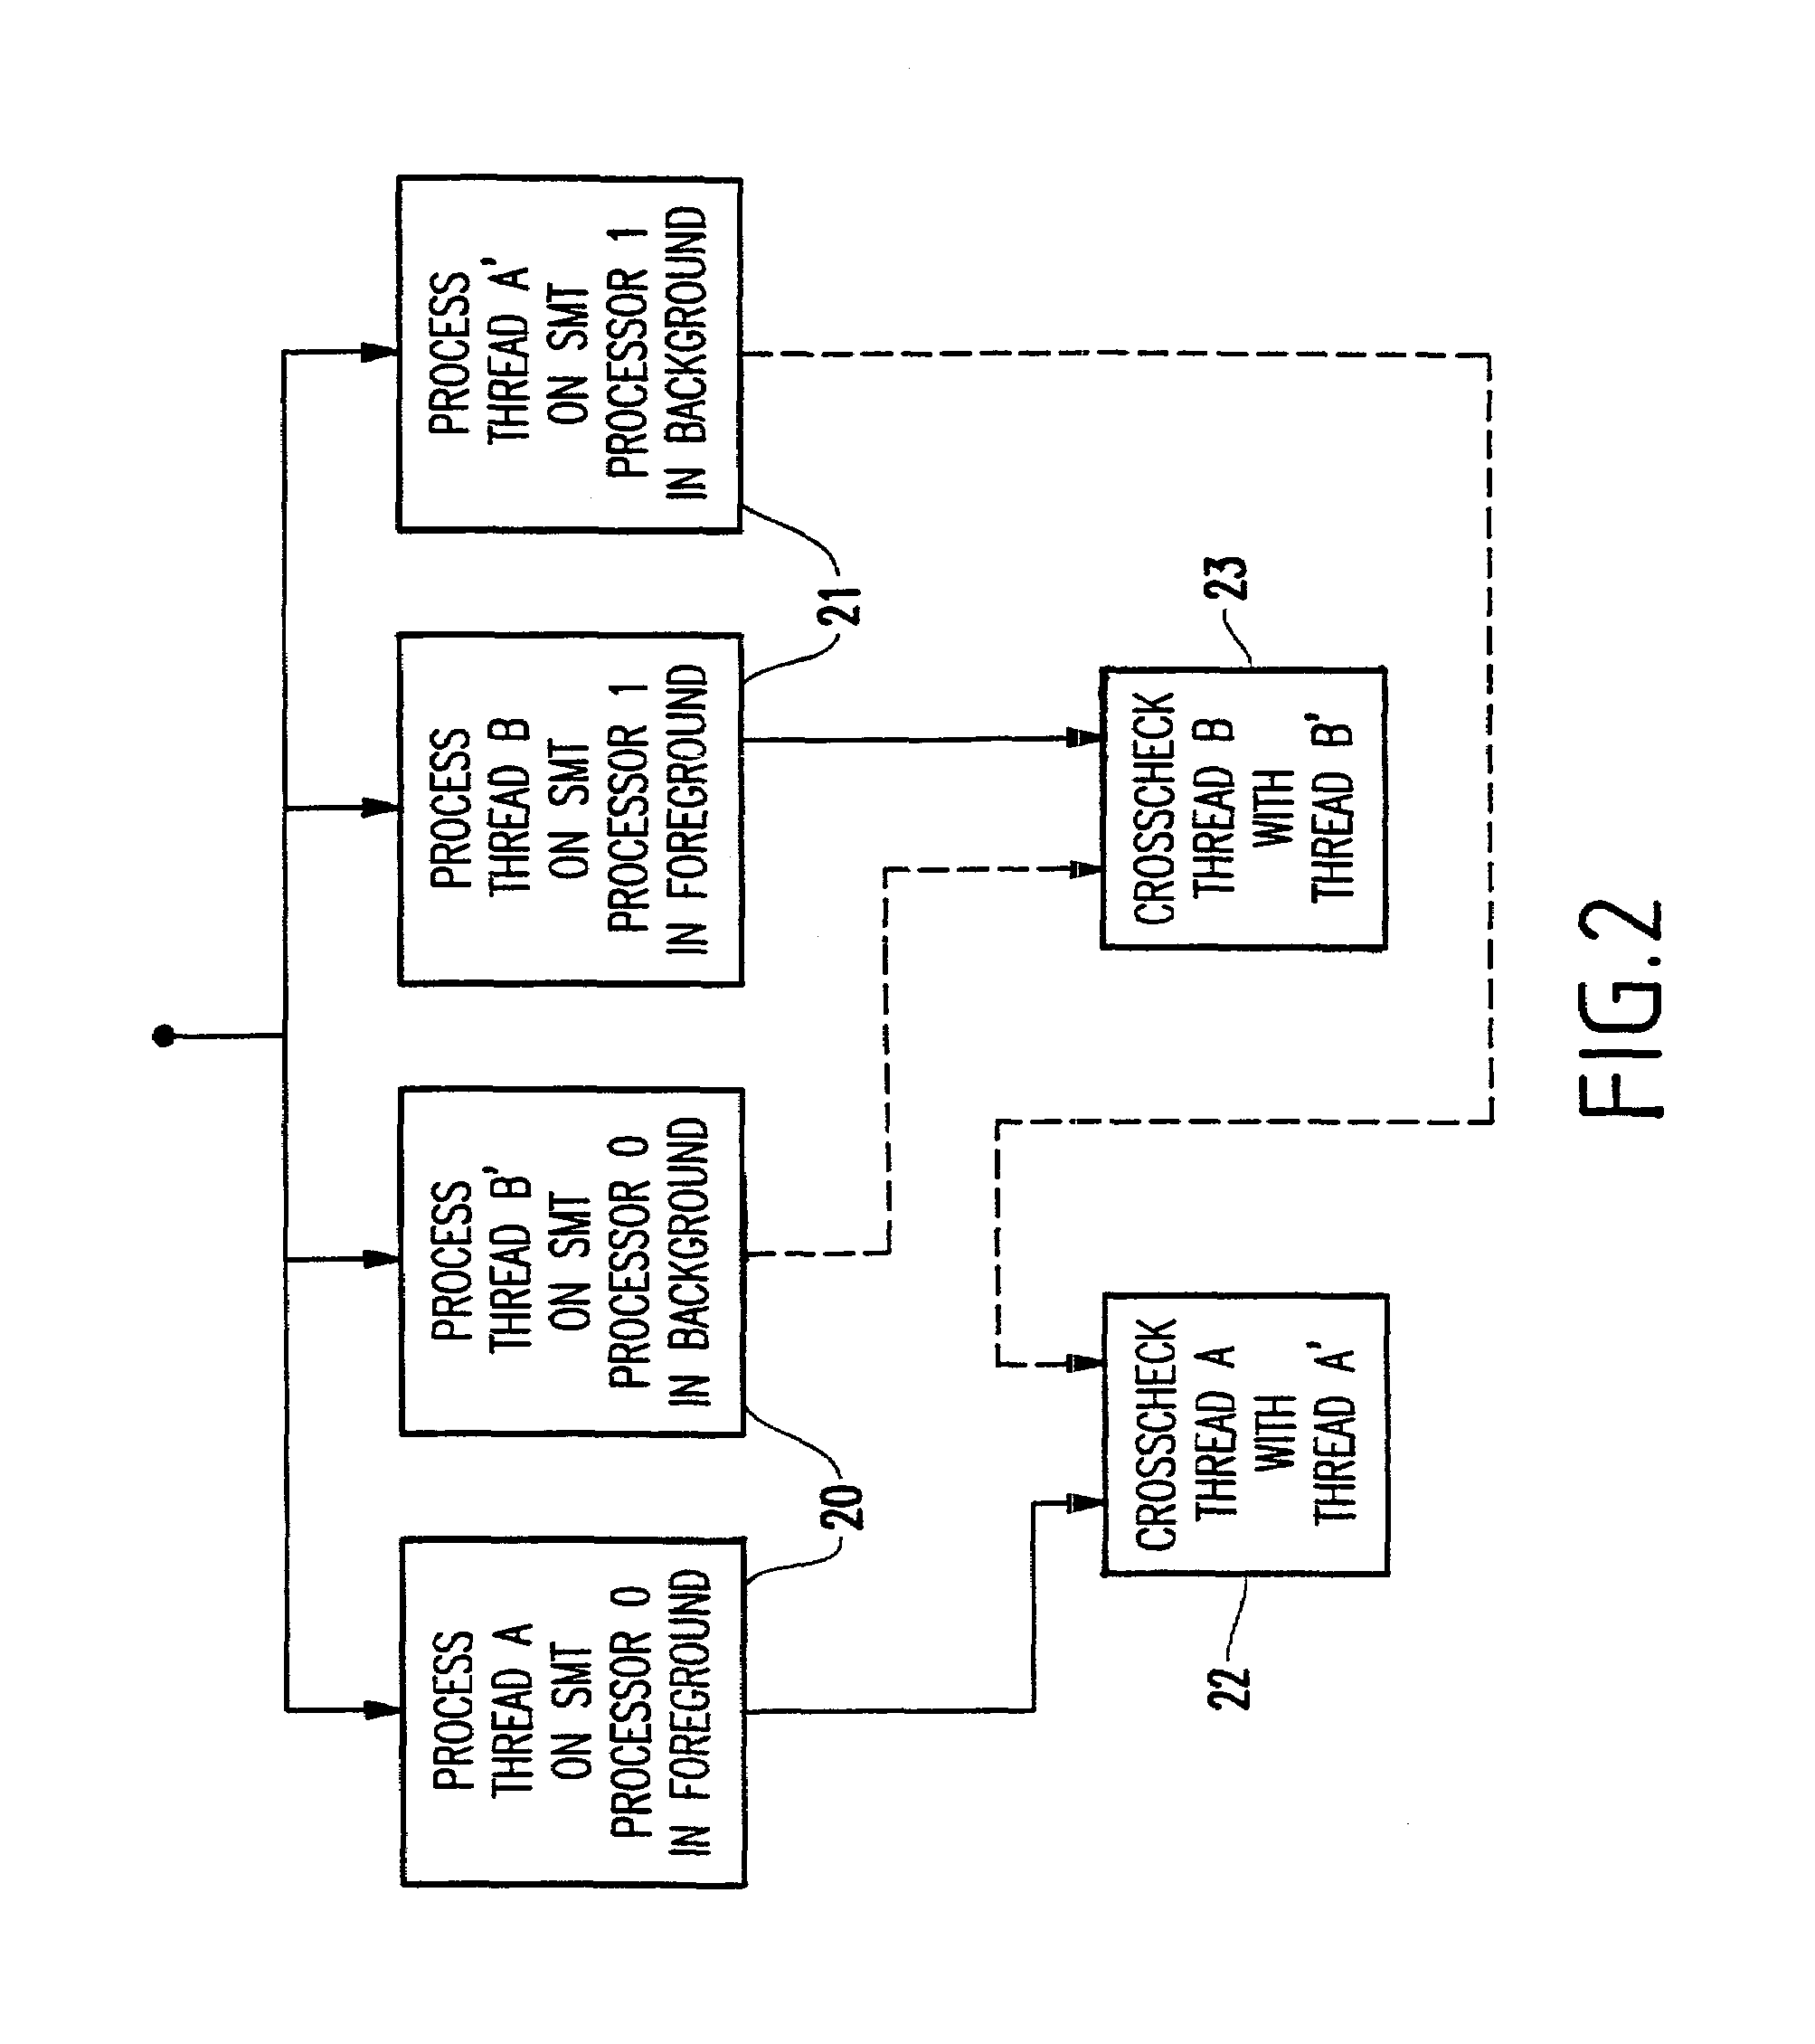 Method and apparatus for fault-tolerance via dual thread crosschecking